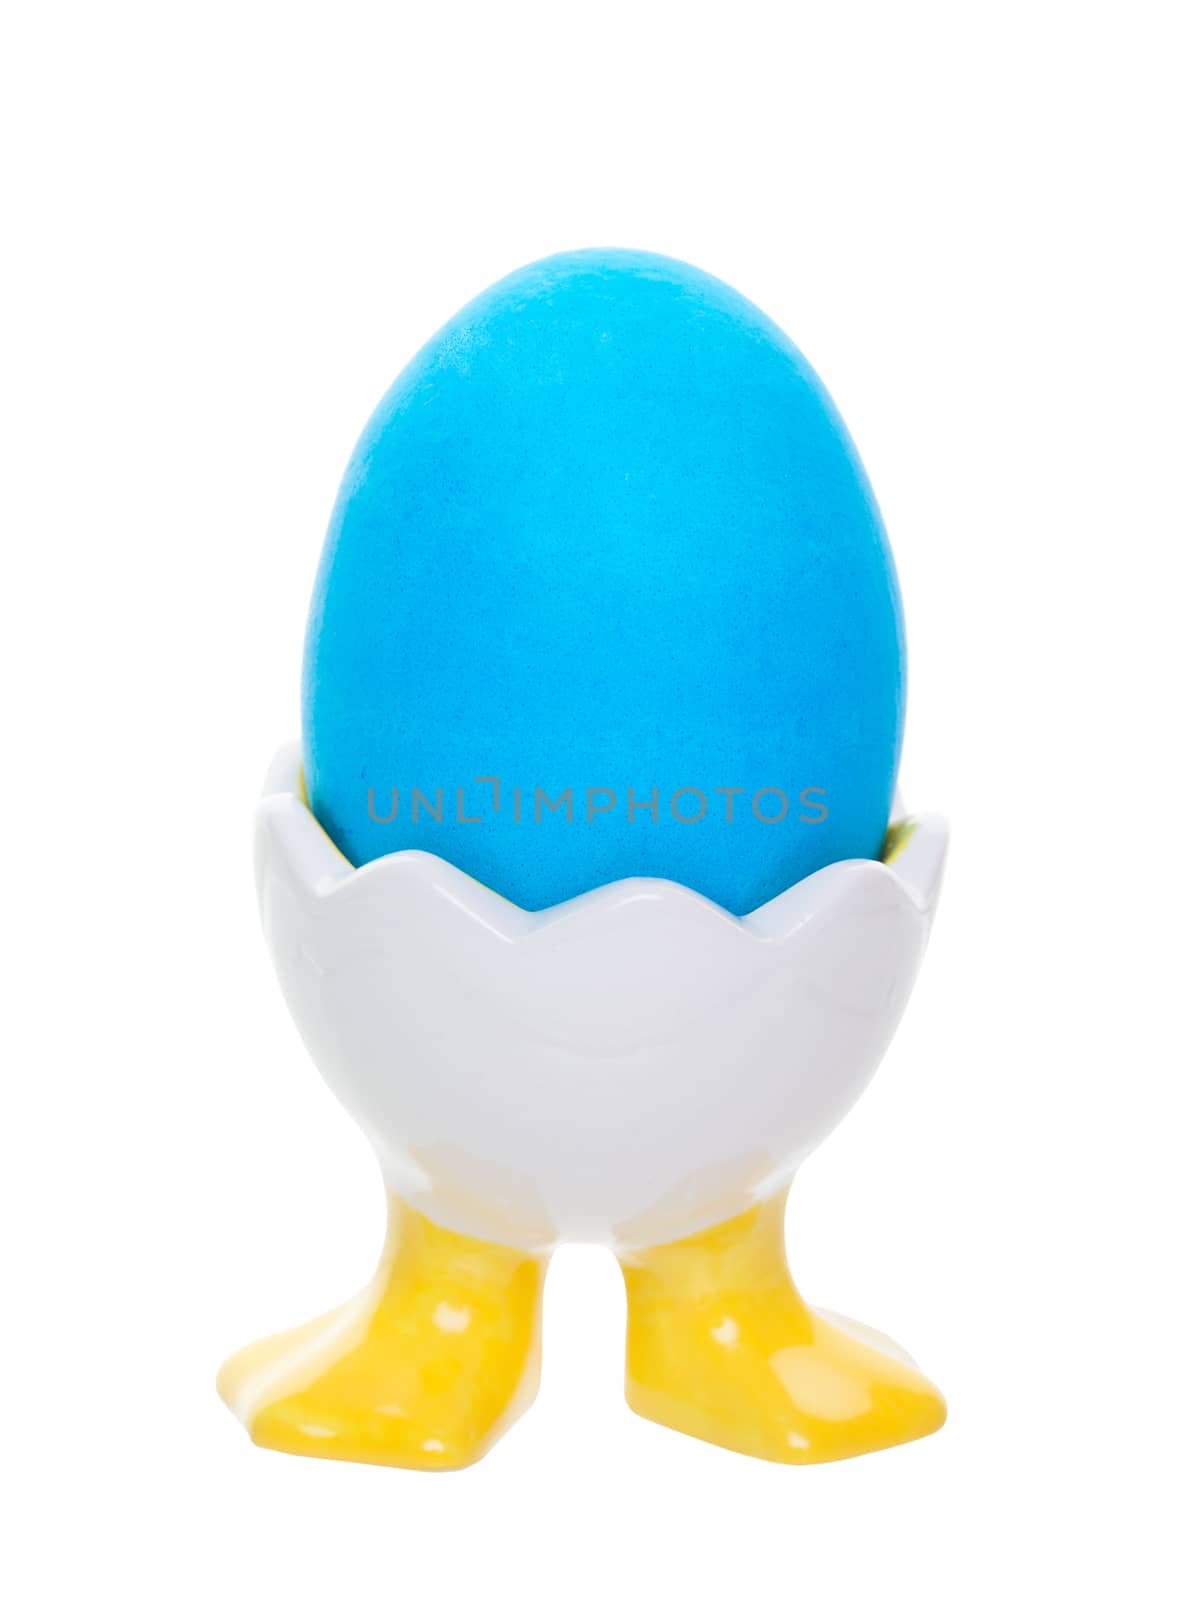 Bright blue Easter egg in an easter egg cup with duck feet. Shot on white background.